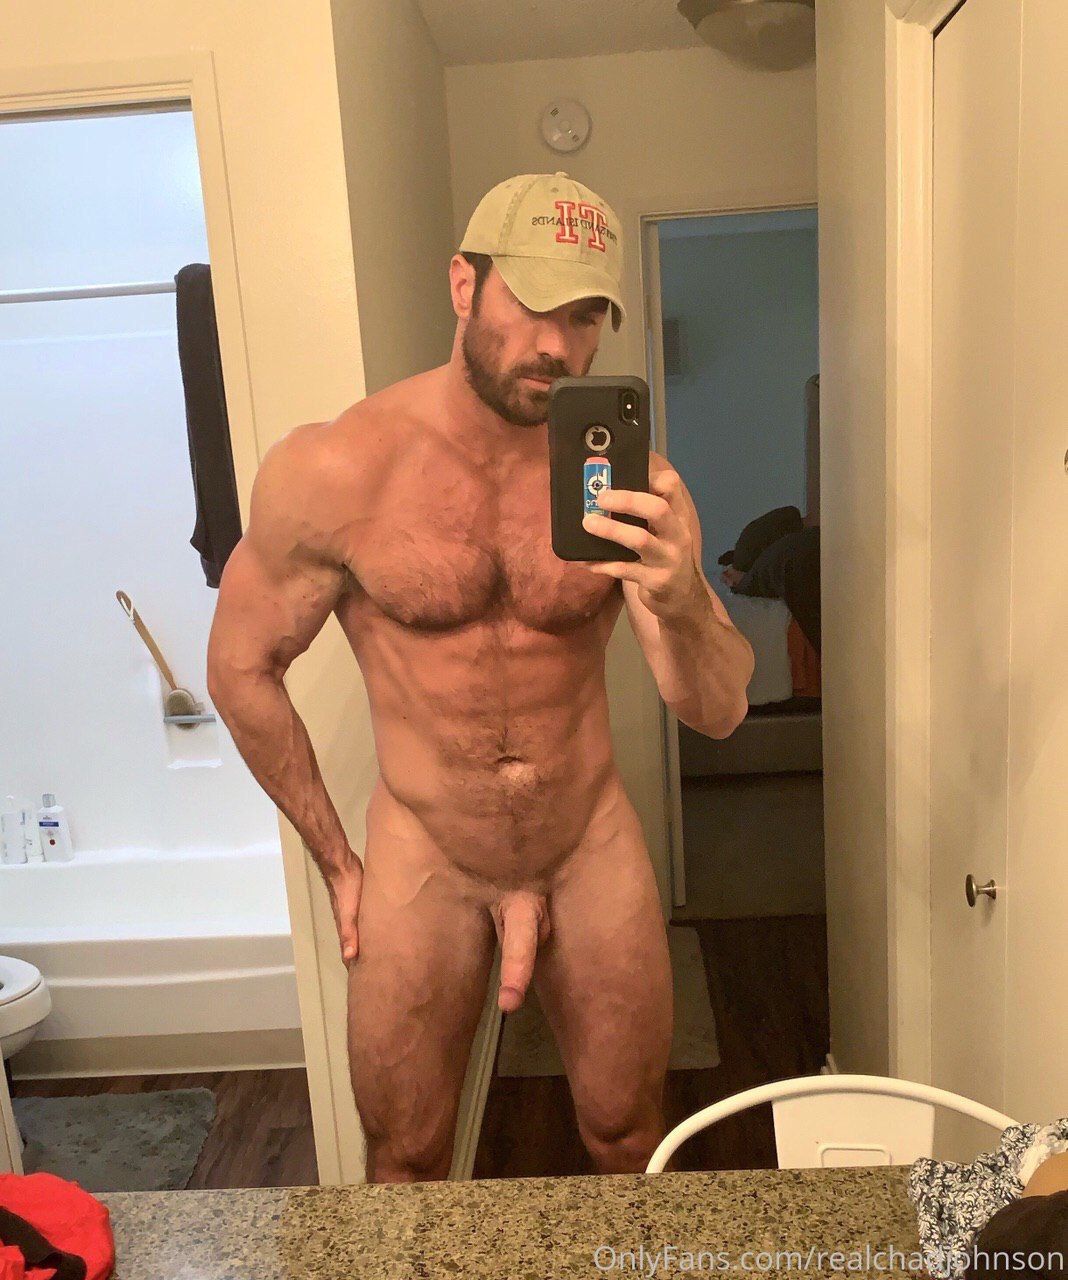 Porn realchadjohnson overview for